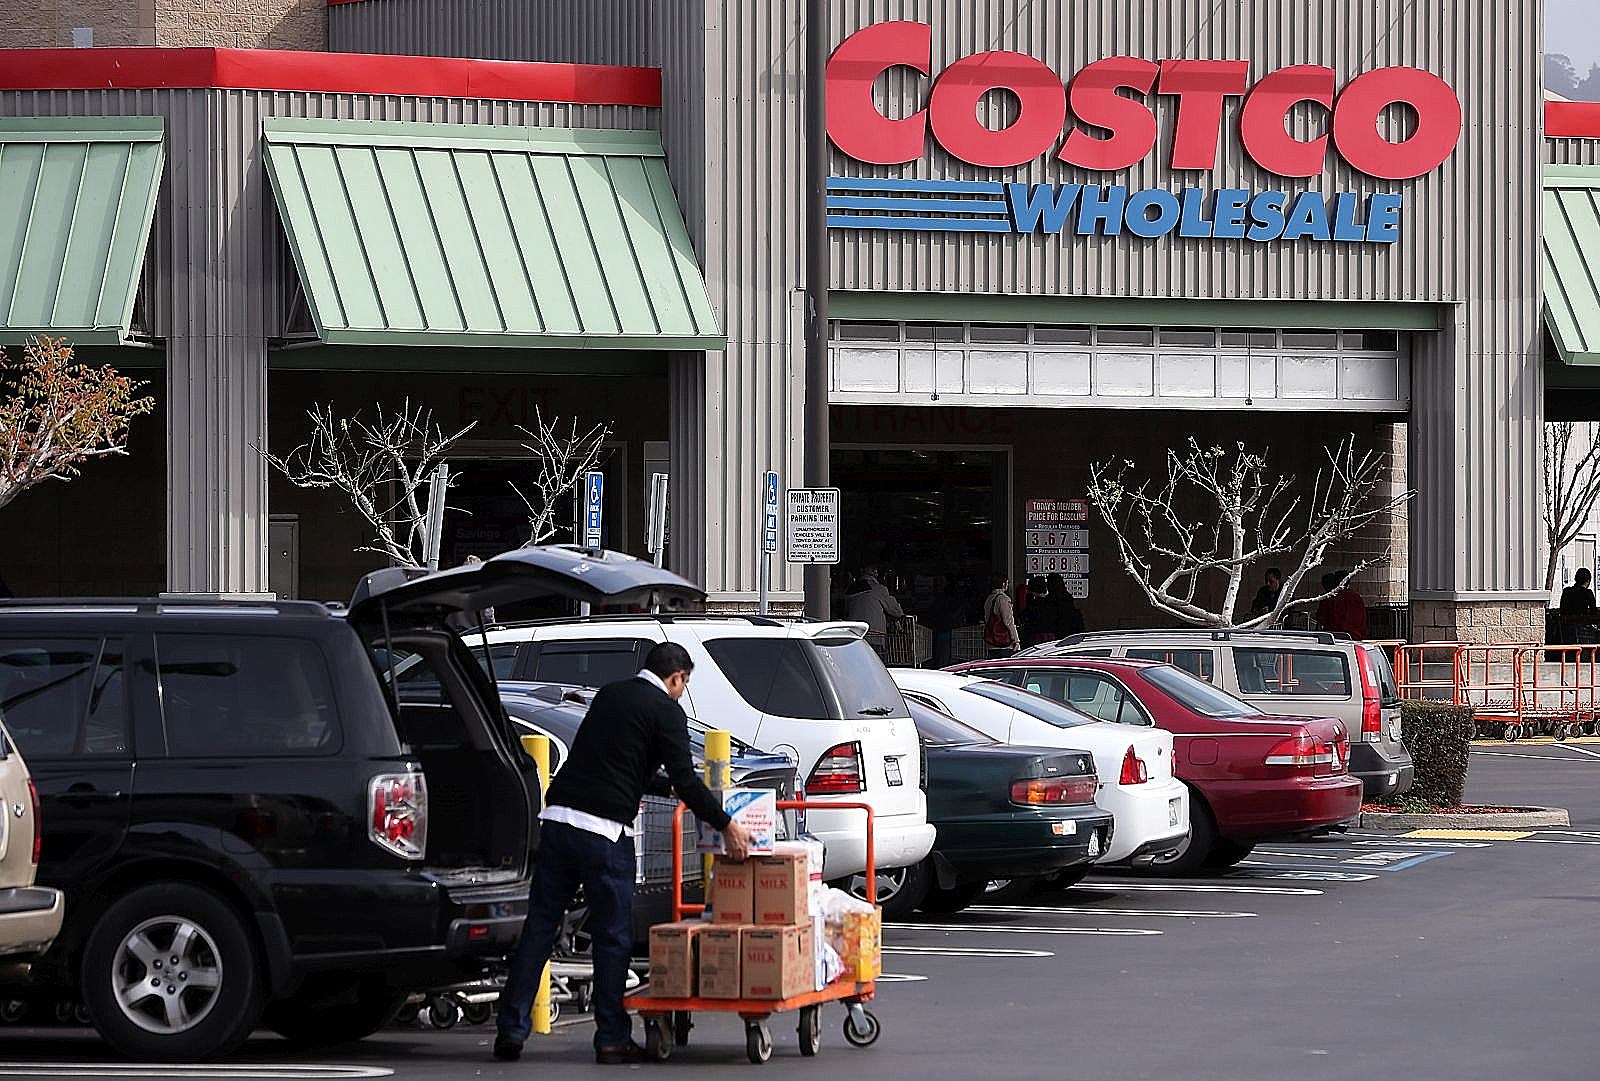 groupon and costco